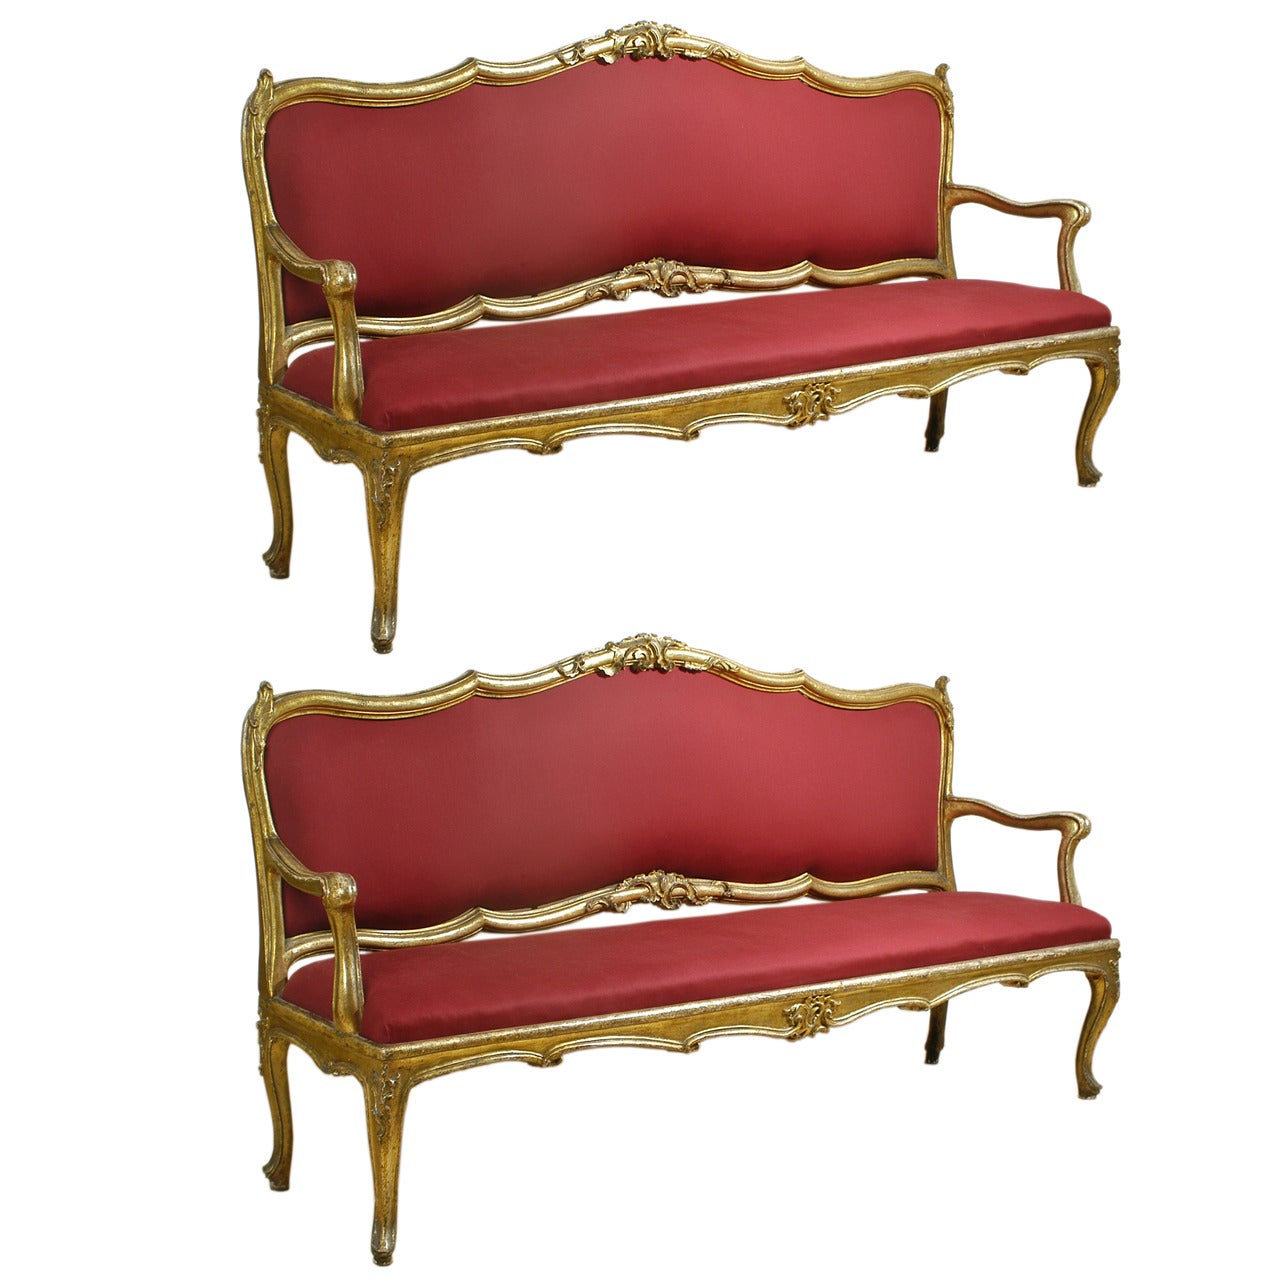 Extraordinary Pair of Louis XV Giltwood Settee, Italy